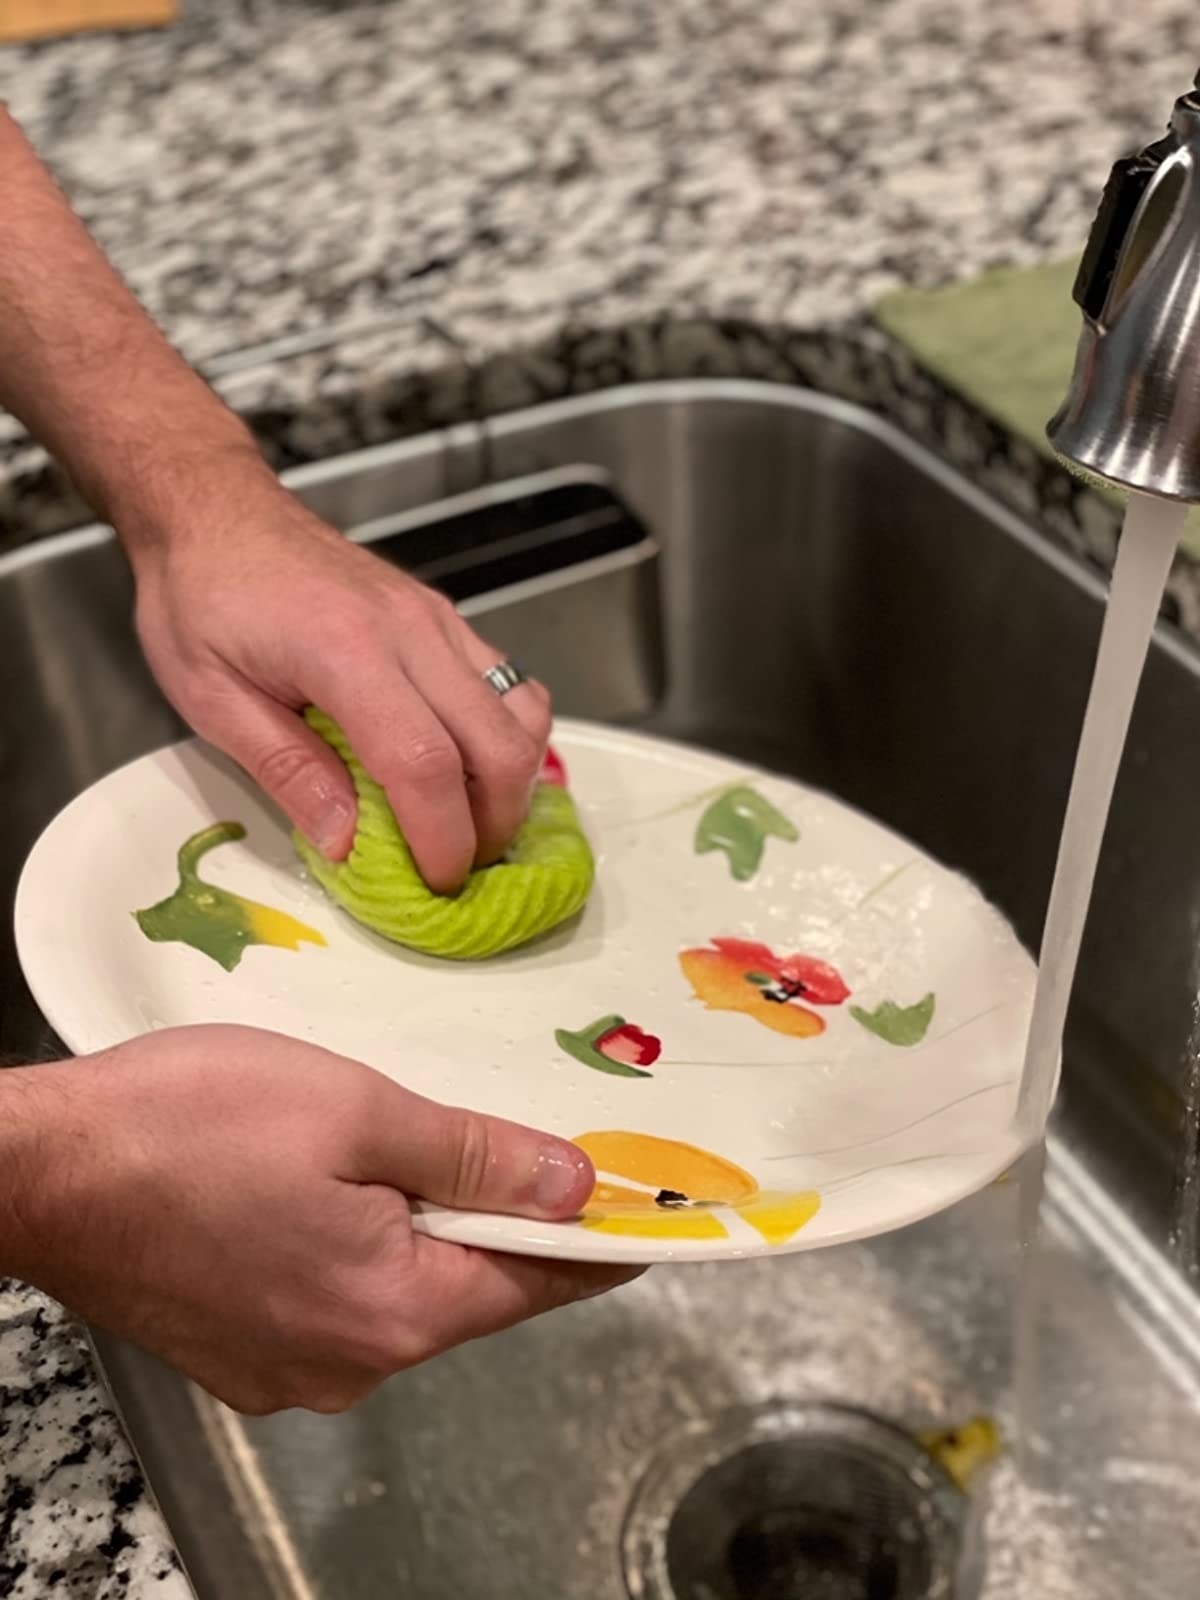 Your Kitchen Needs This $5.99 Dish Squeegee! Here's why